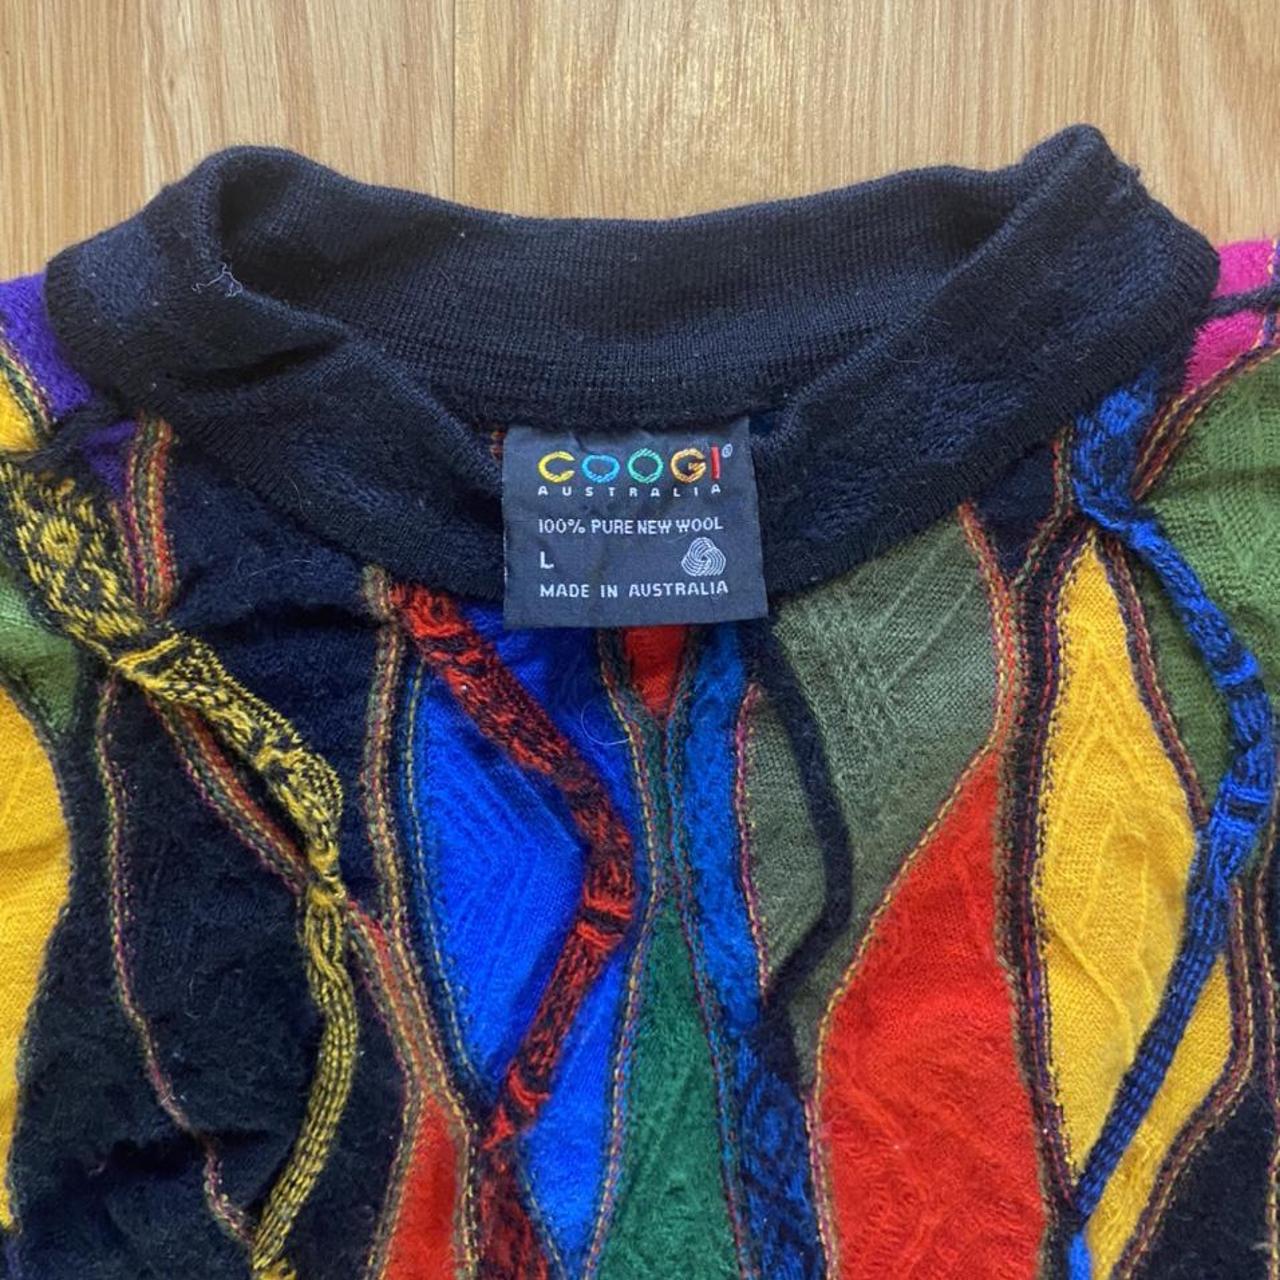 COOGI Mulch 3D Knit made in Australia - トップス